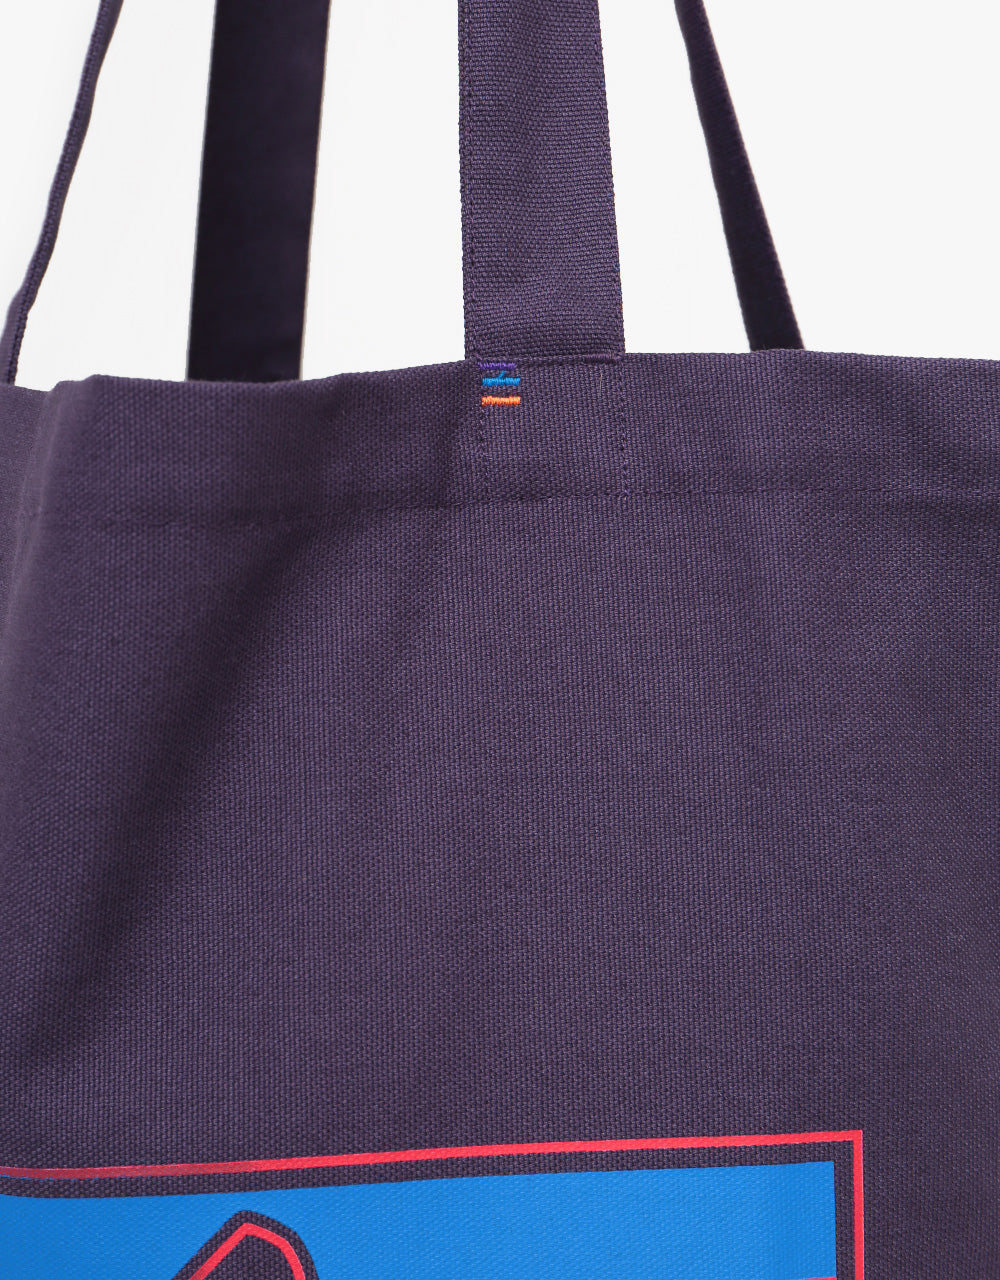 Patagonia Together For The Planet Tote Bag - Piton Purple